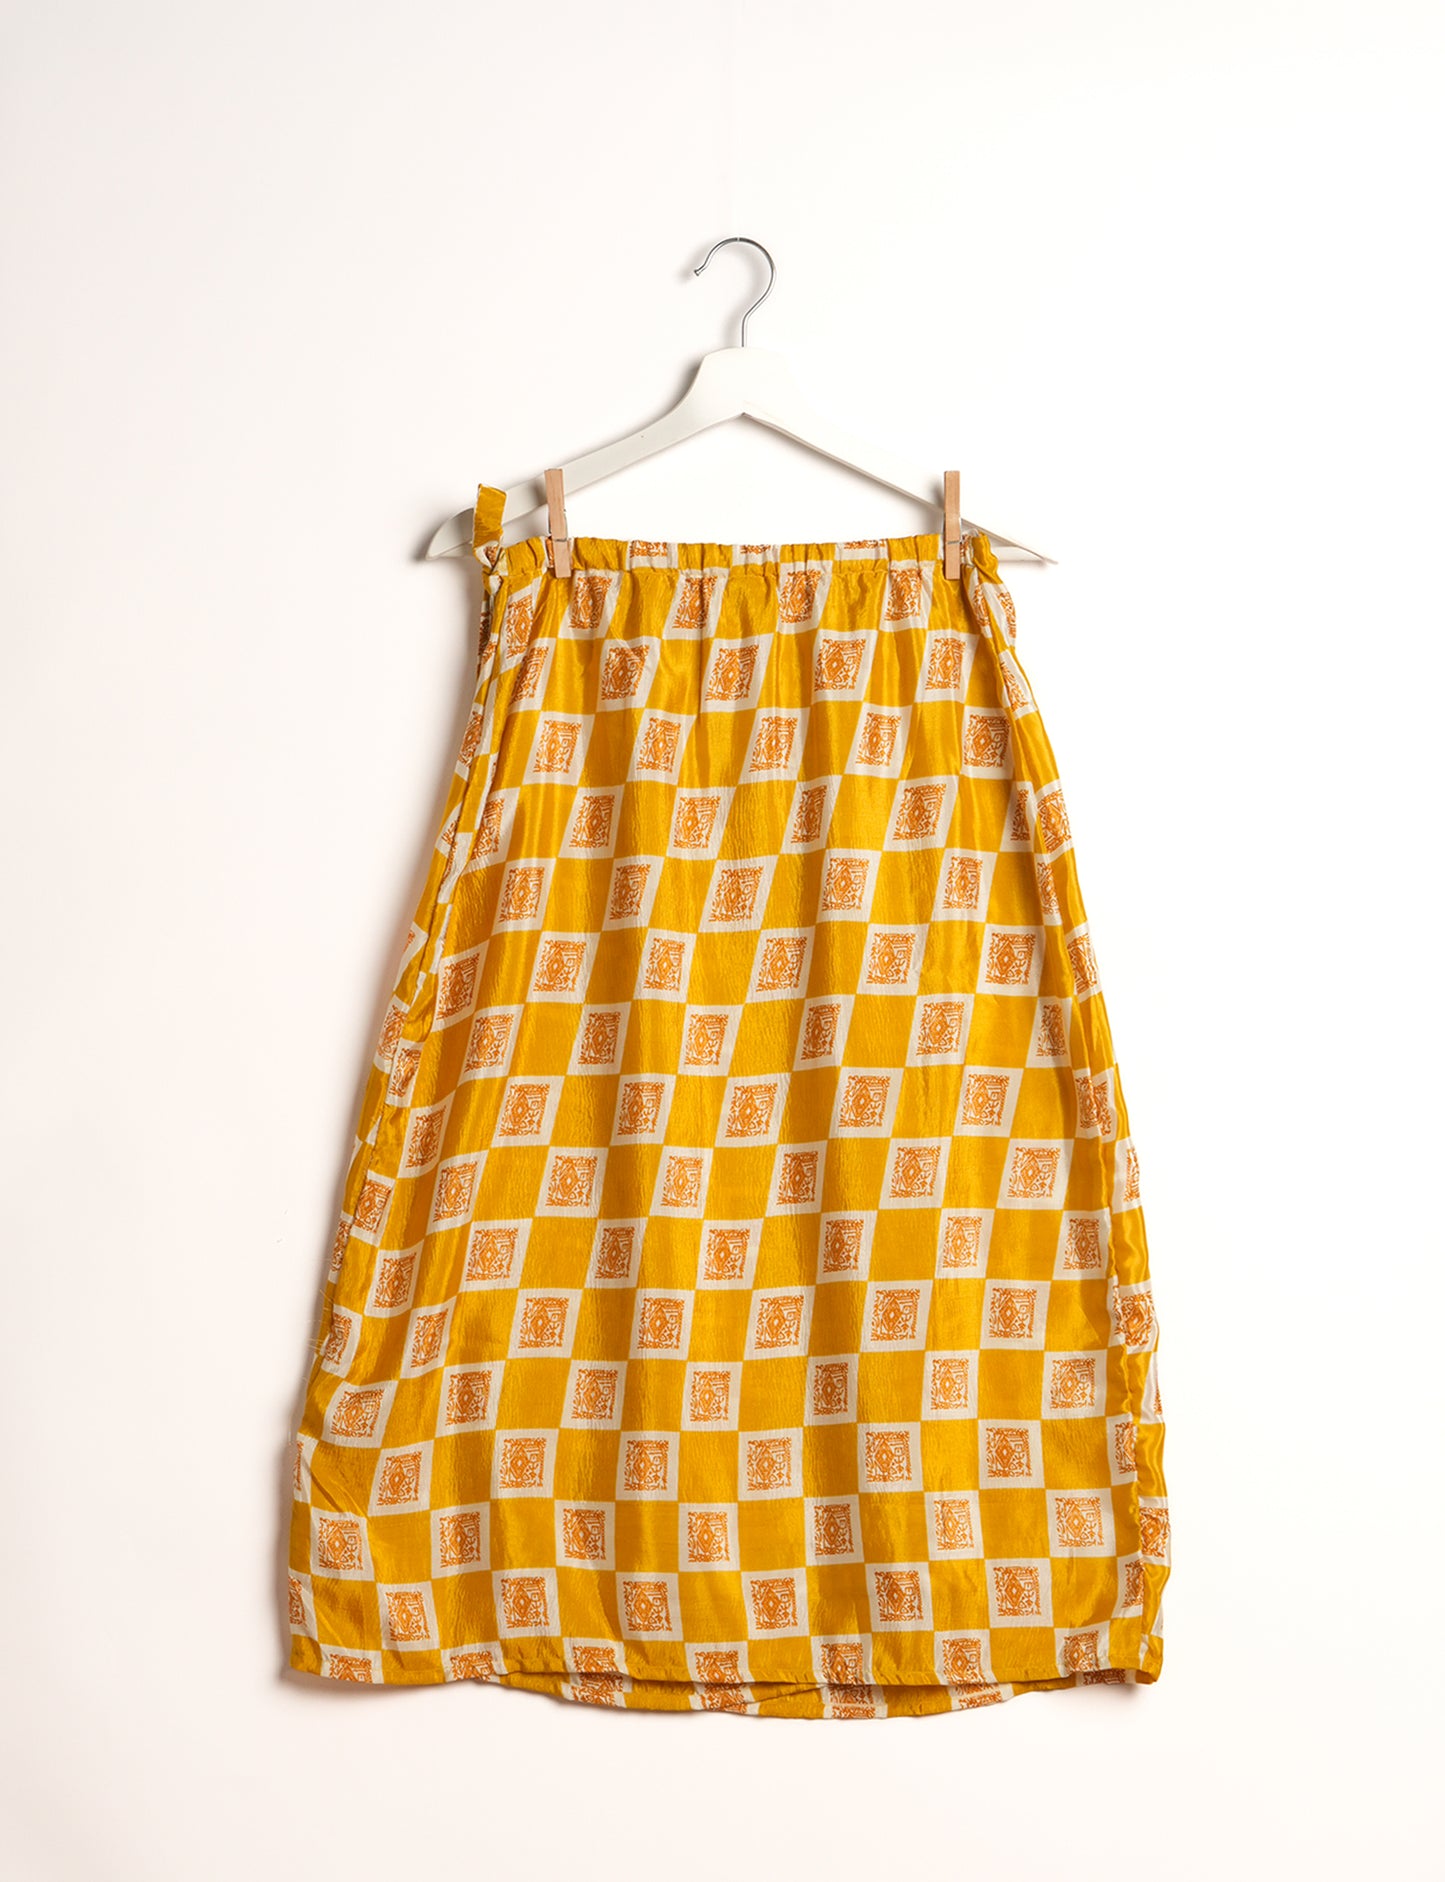 Versatile and sustainable LONG WRAPAROUND SKIRT, mid-calf length, defying convention and suitable for all waist sizes. Elevate your style with this eco-friendly and comfortable piece, creating a unique and inclusive fashion experience.